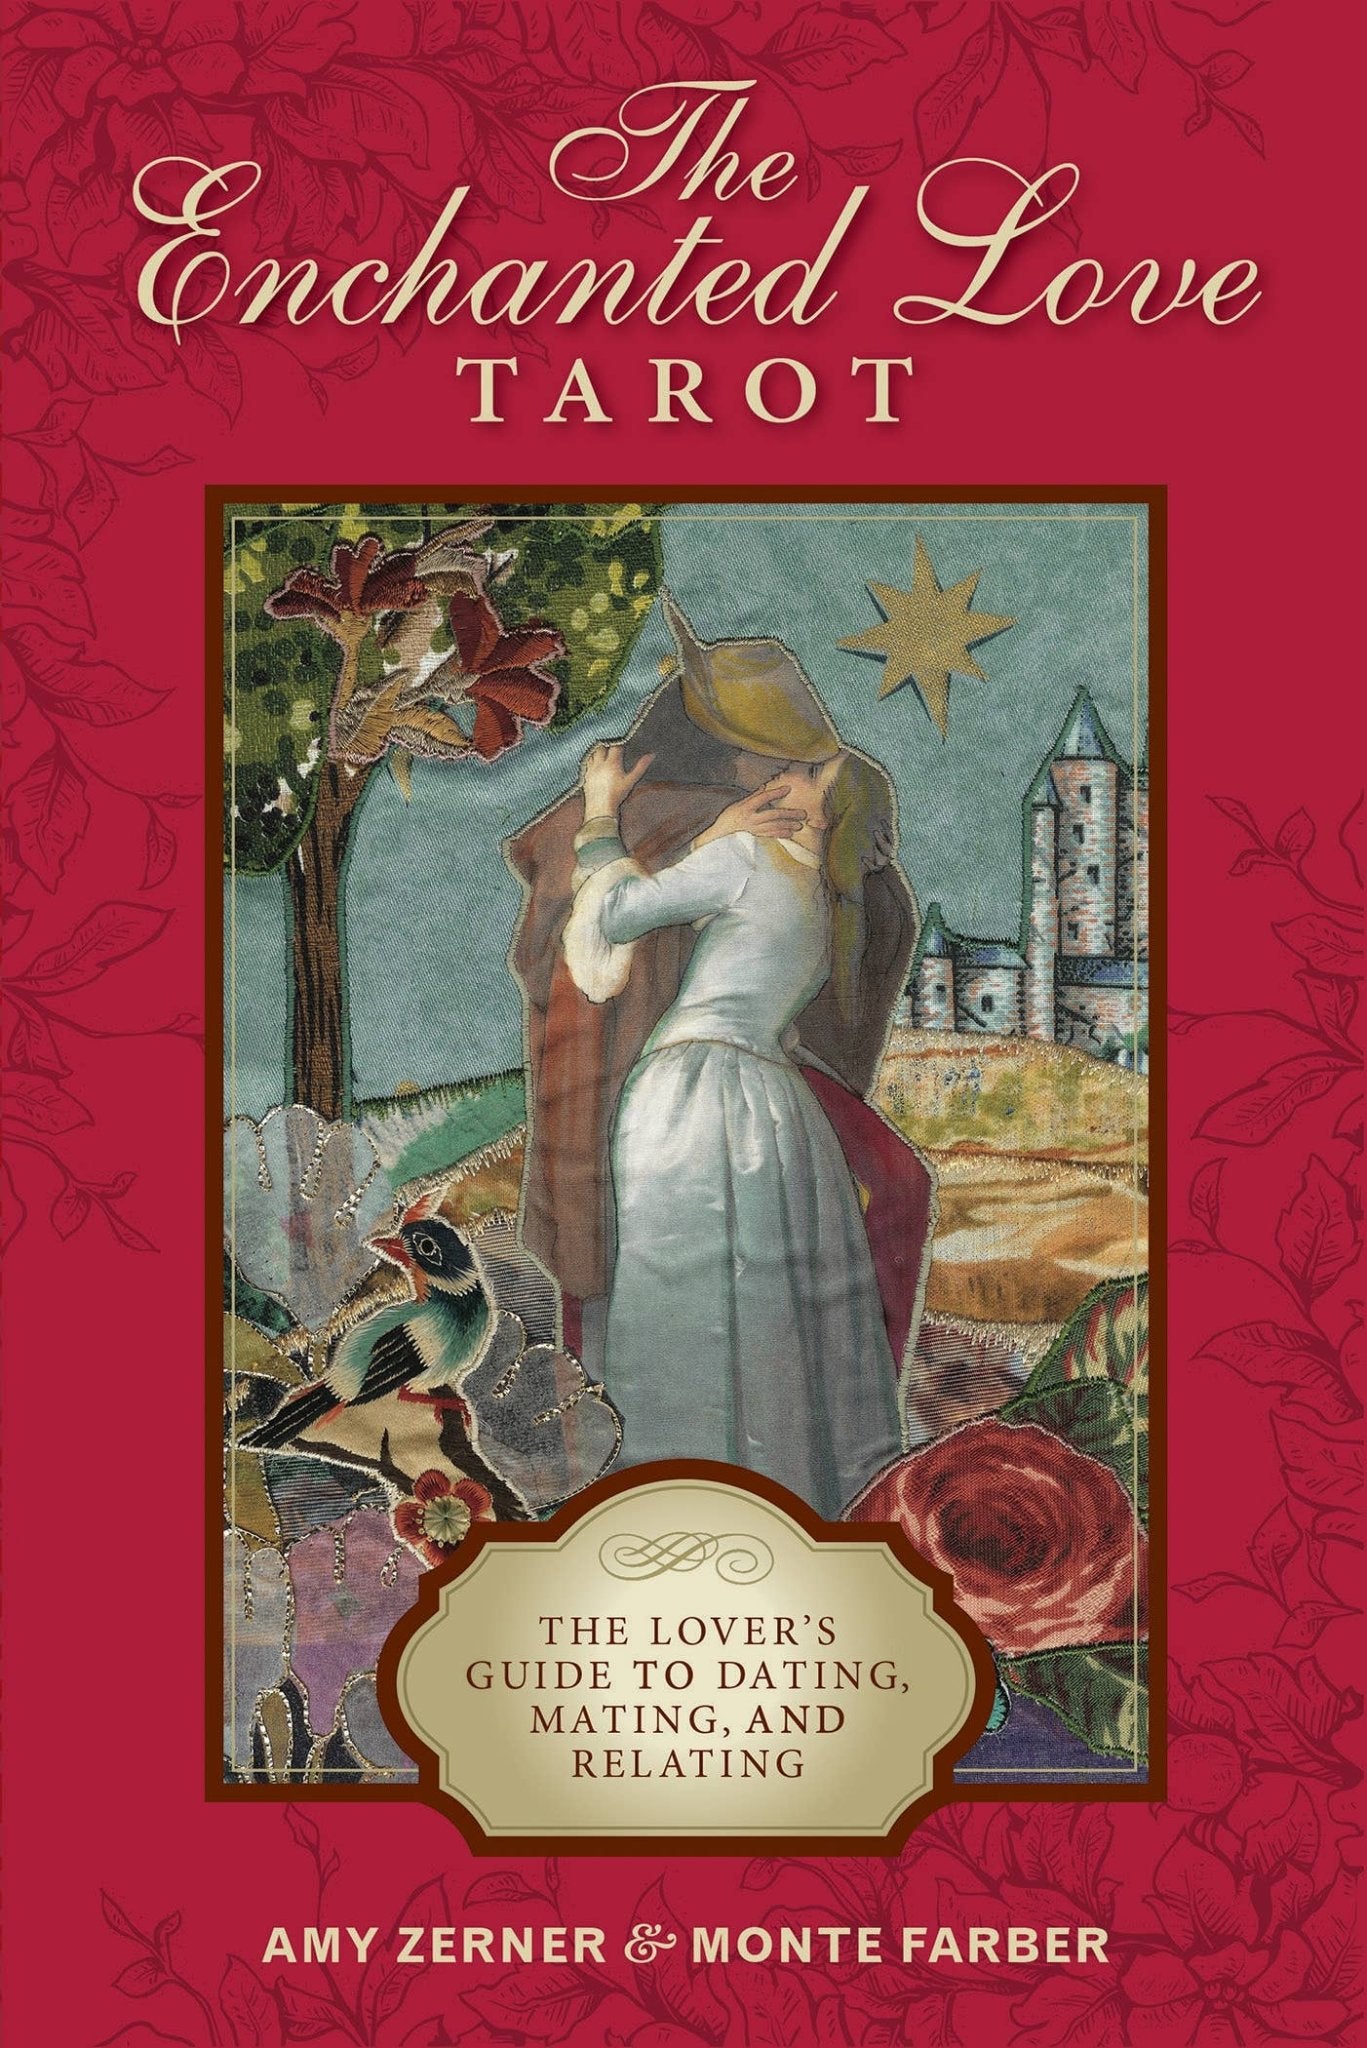 The Enchanted Love Tarot | The Lover's Guide to Dating, Mating, and Relating - Spiral Circle